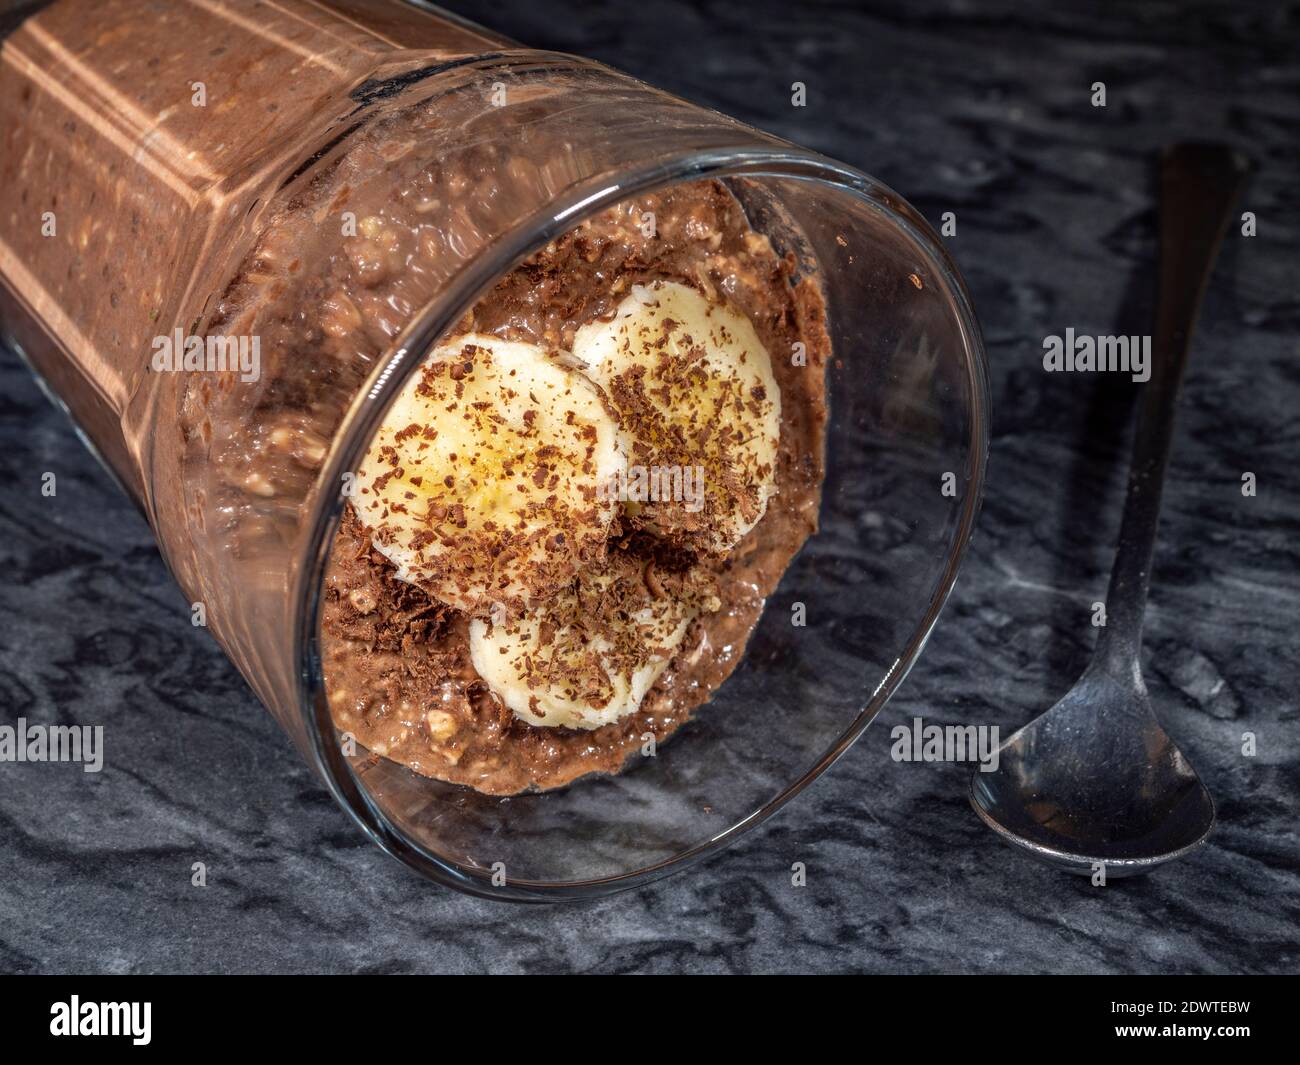 Closeup POV shot of a glass tumbler on its side, full of thick textured, chocolate overnight oats with banana topping, which has set (breakfast food). Stock Photo